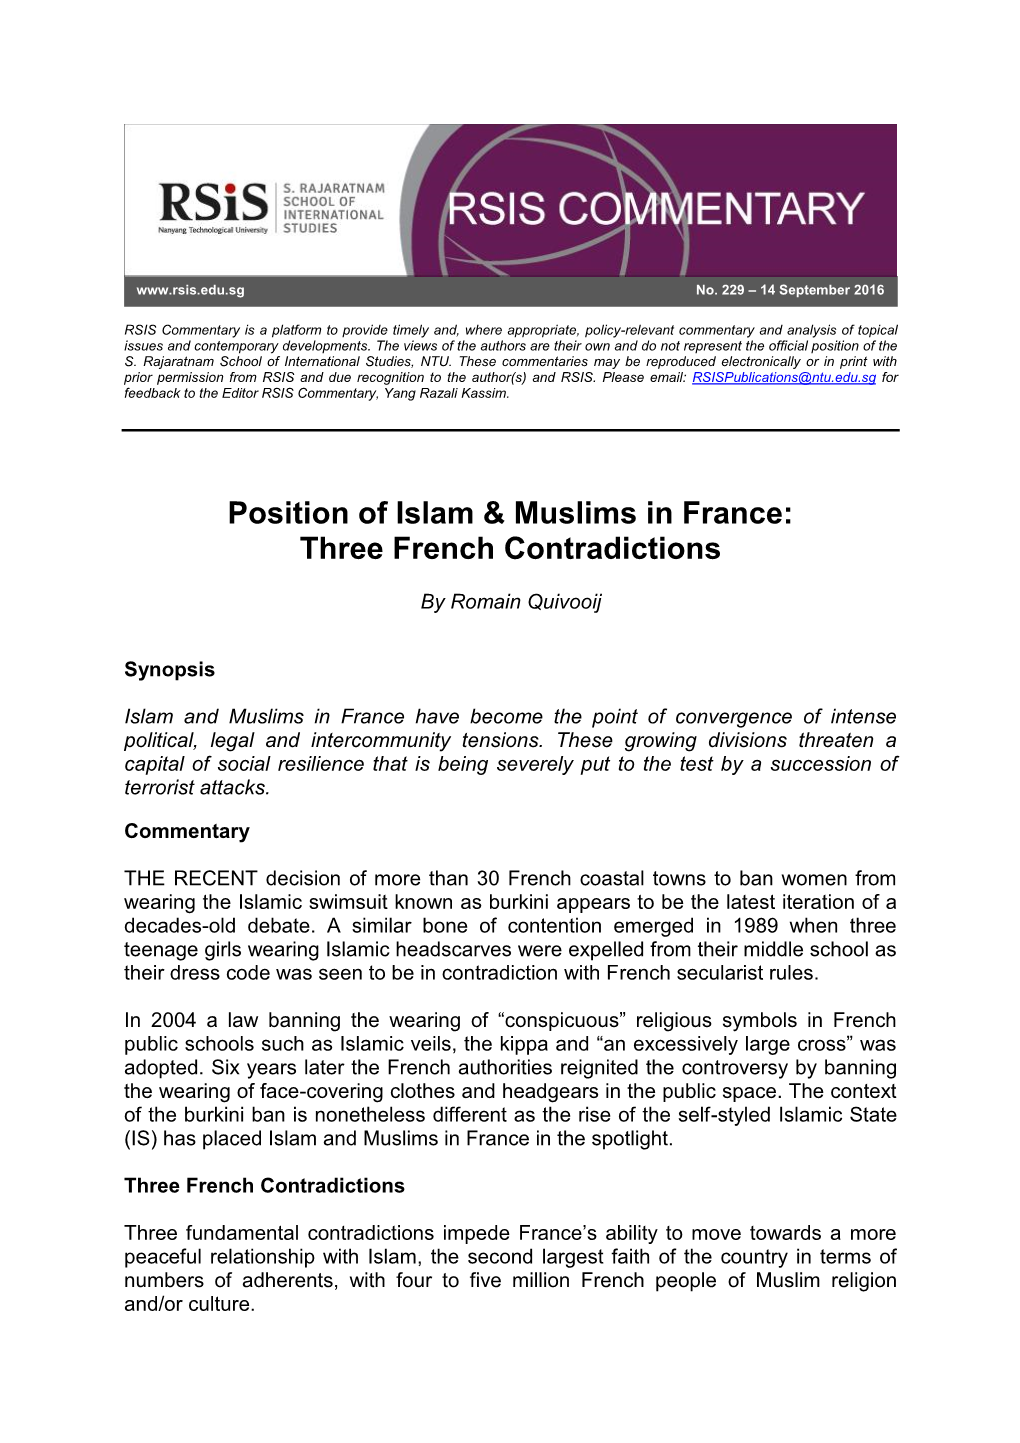 Position of Islam & Muslims in France: Three French Contradictions